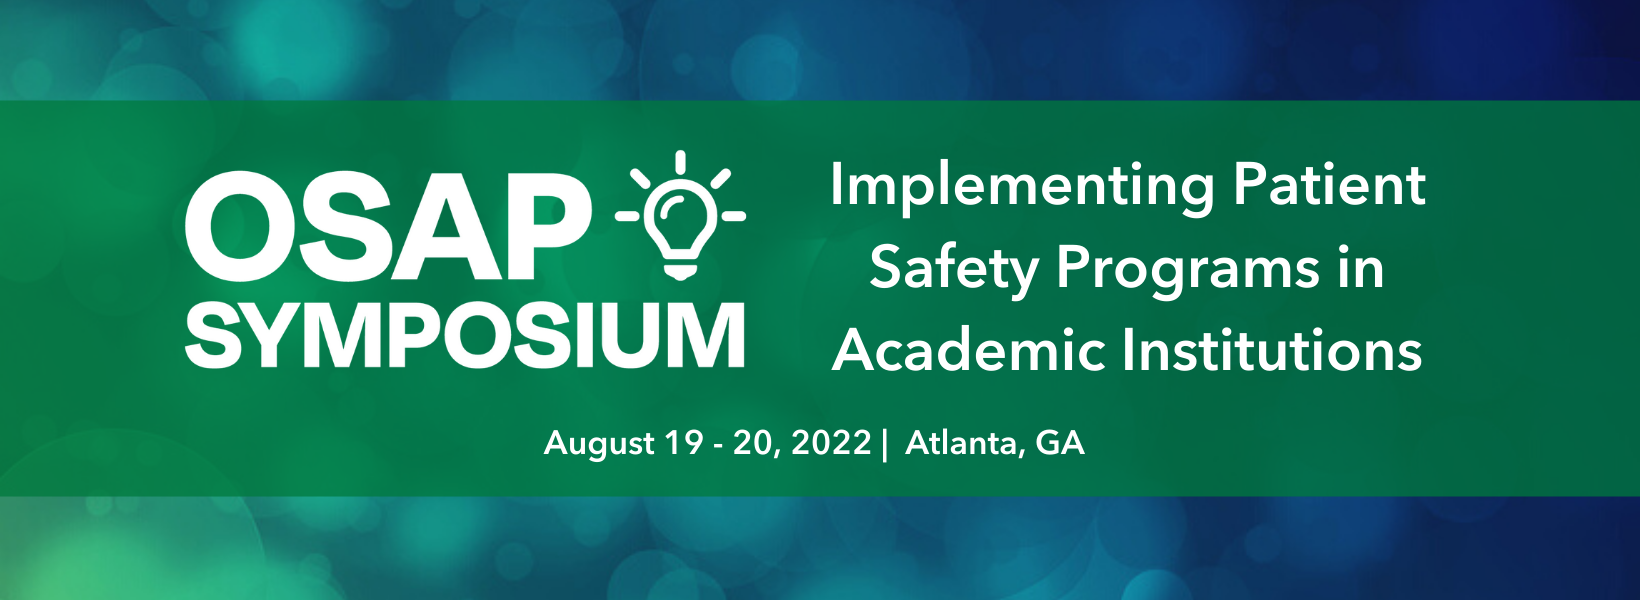 OSAP Symposium: Implementing Patient Safety Programs in Academic Institutions